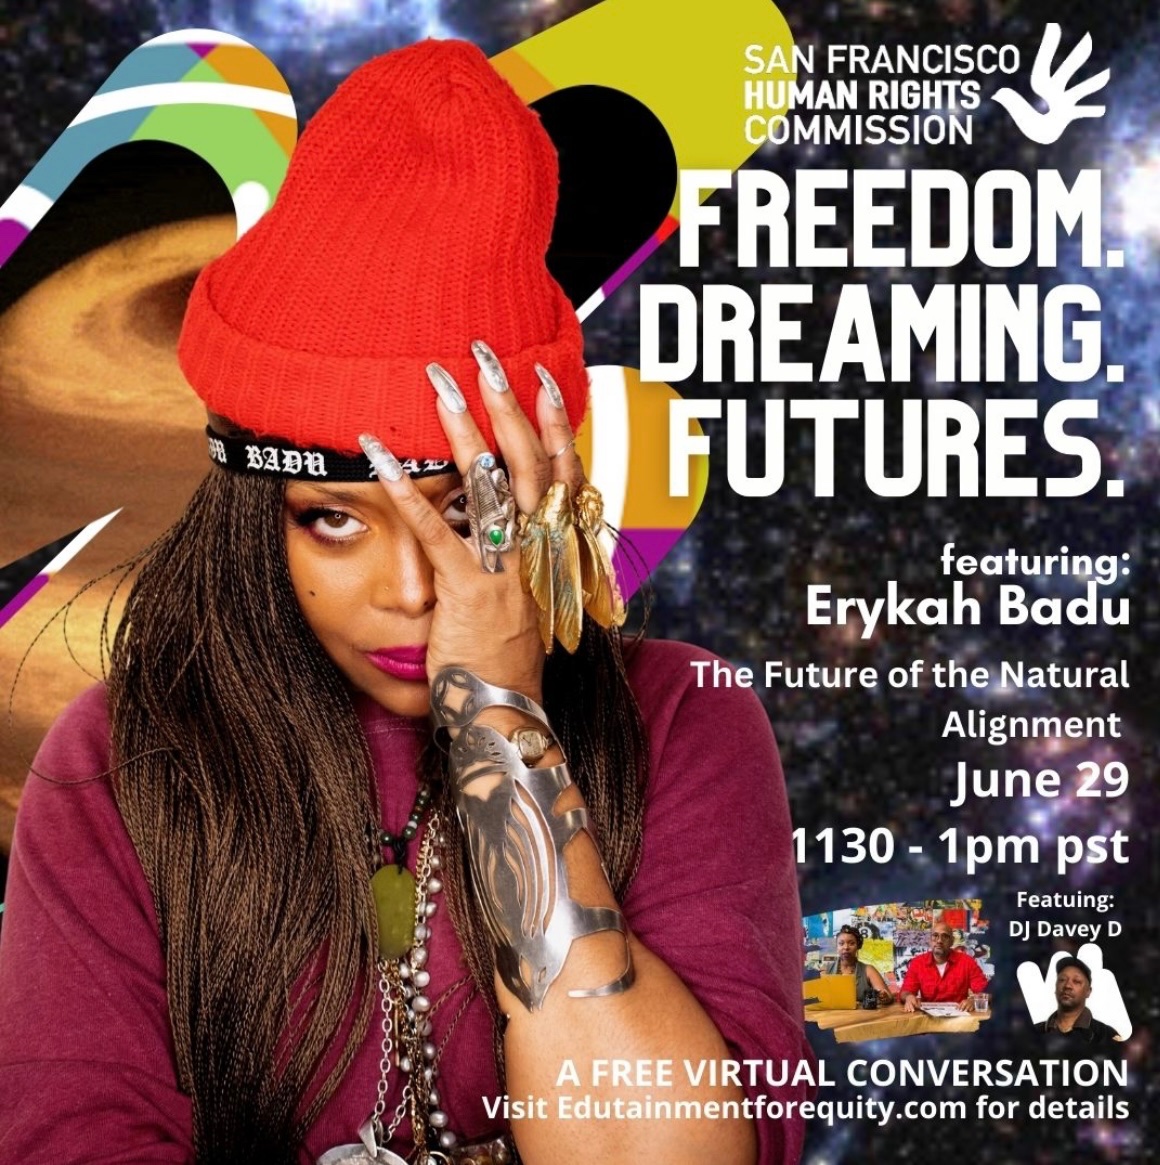 Freedom.Dreaming.Futures featuring Erykah Badu -- Join the @SFHumanRights Commission & Edutainment for Equity for the next virtual conversation about the future of the Black community featuring some of our most influential thought leaders. Register @ edutainmentforequity.com/event-tickets/…